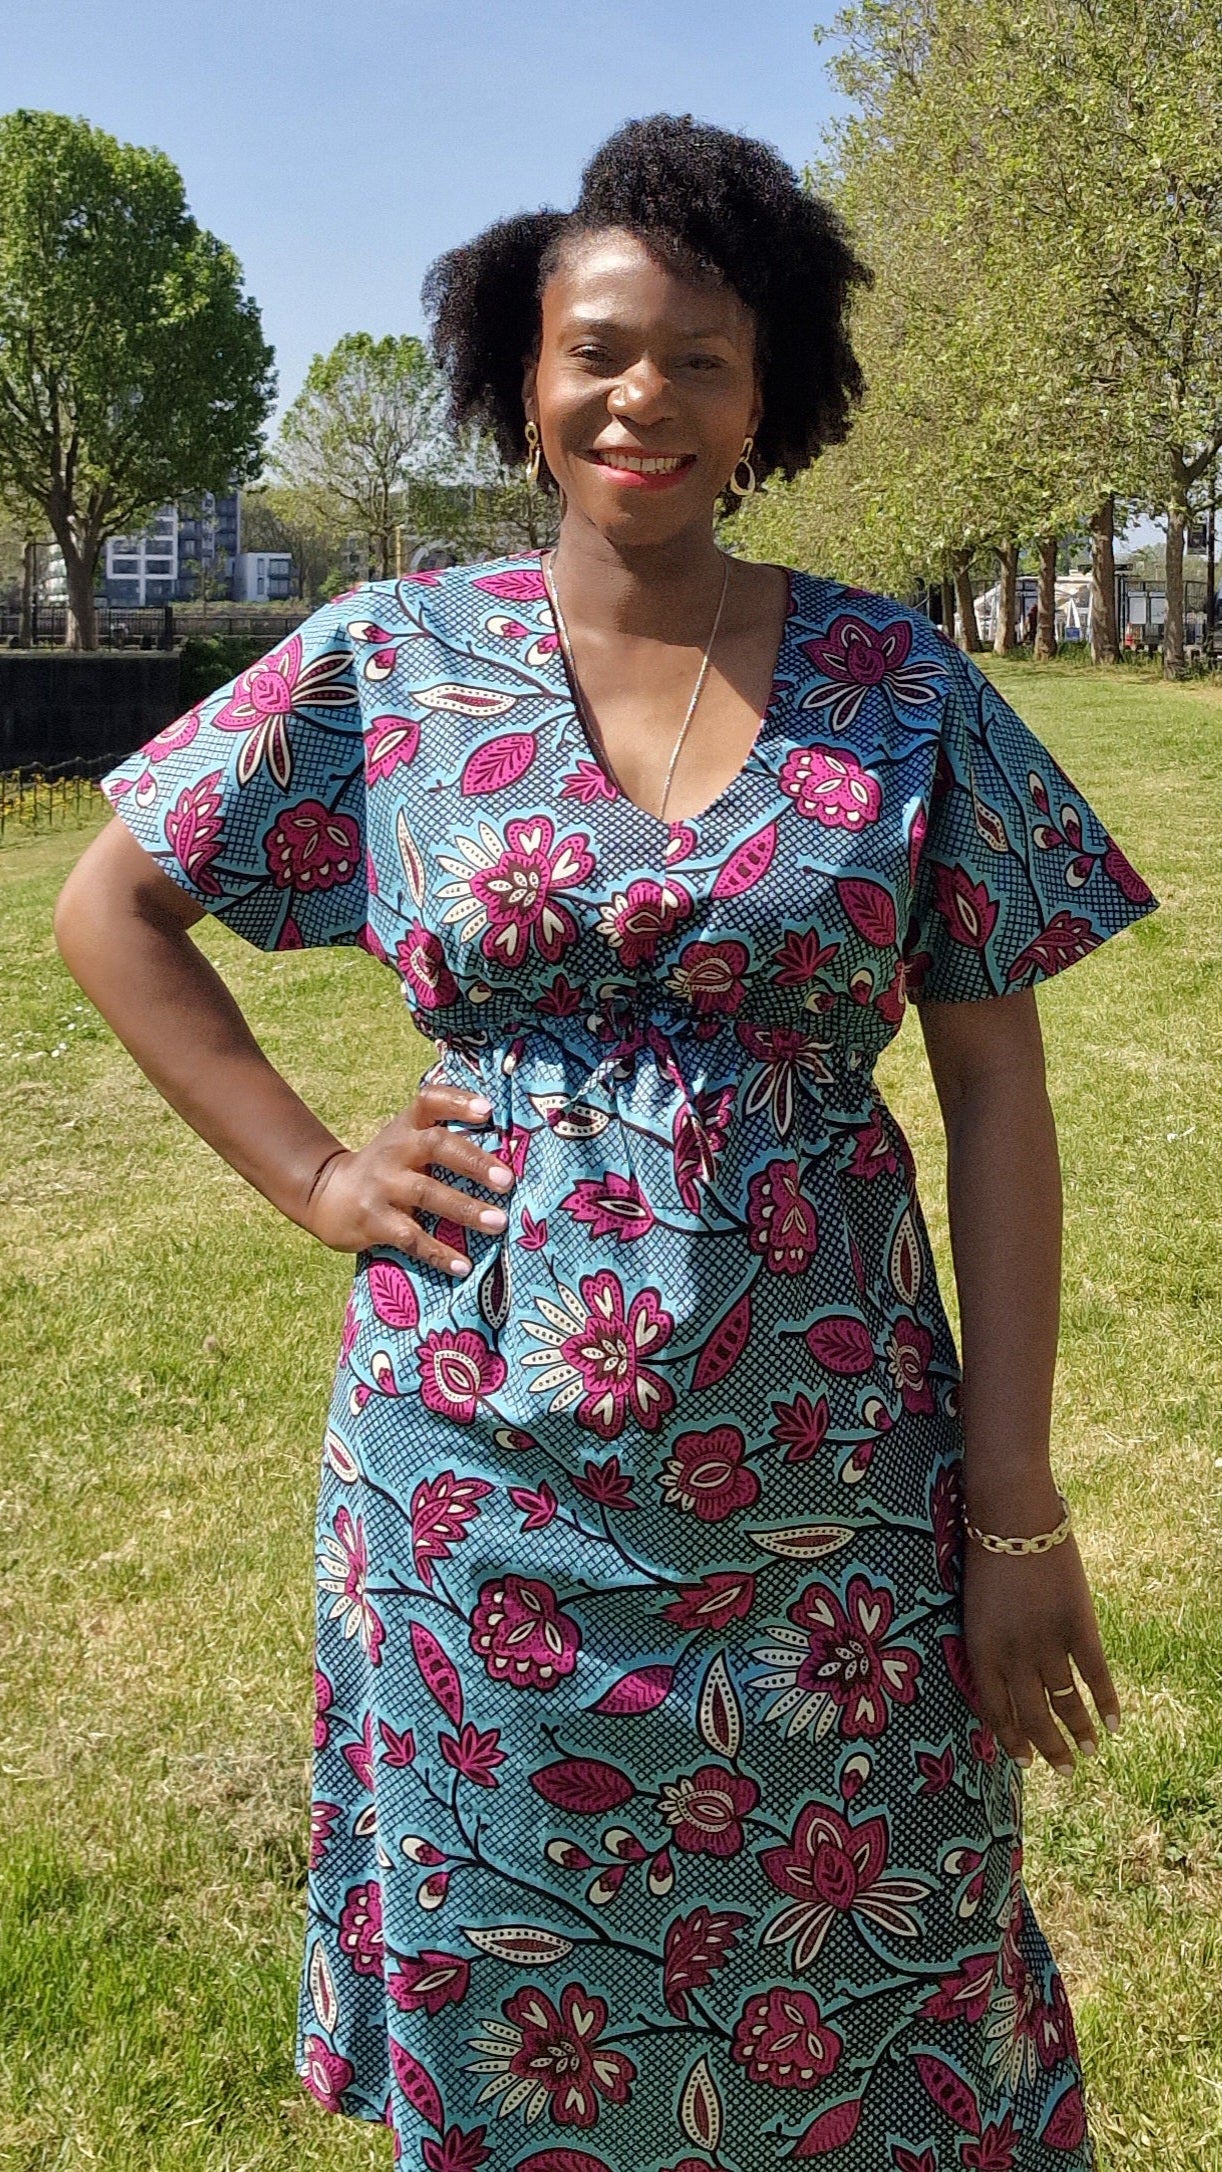 A woman wearing the blue print kaftan dress with pink elements in a park setting, posing confidently.